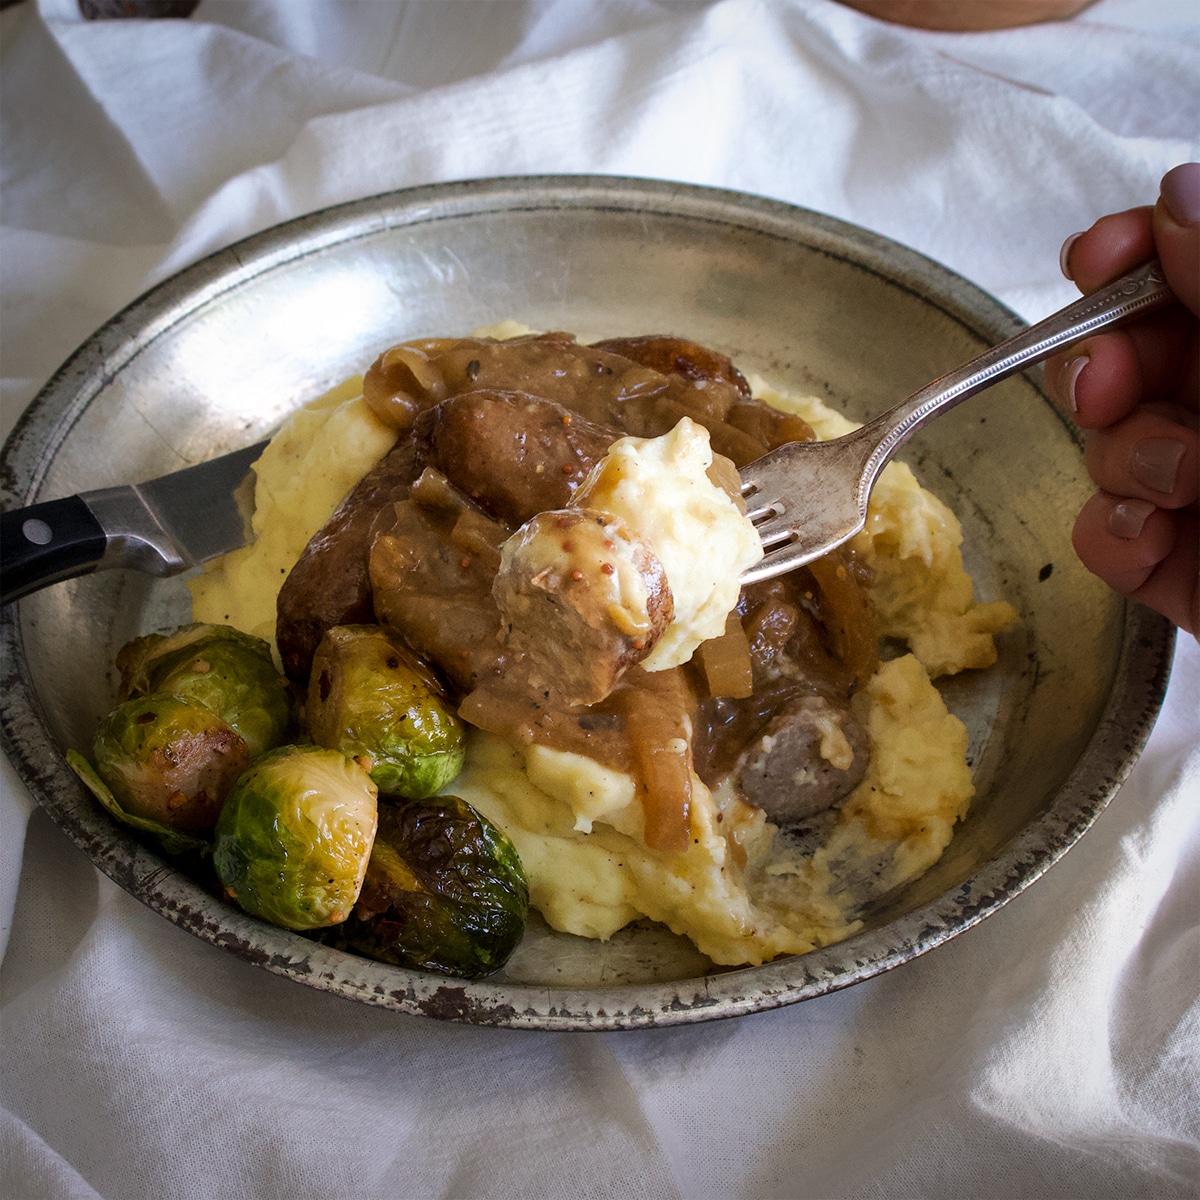 Someone using a fork to lift a bite of bangers and mash.